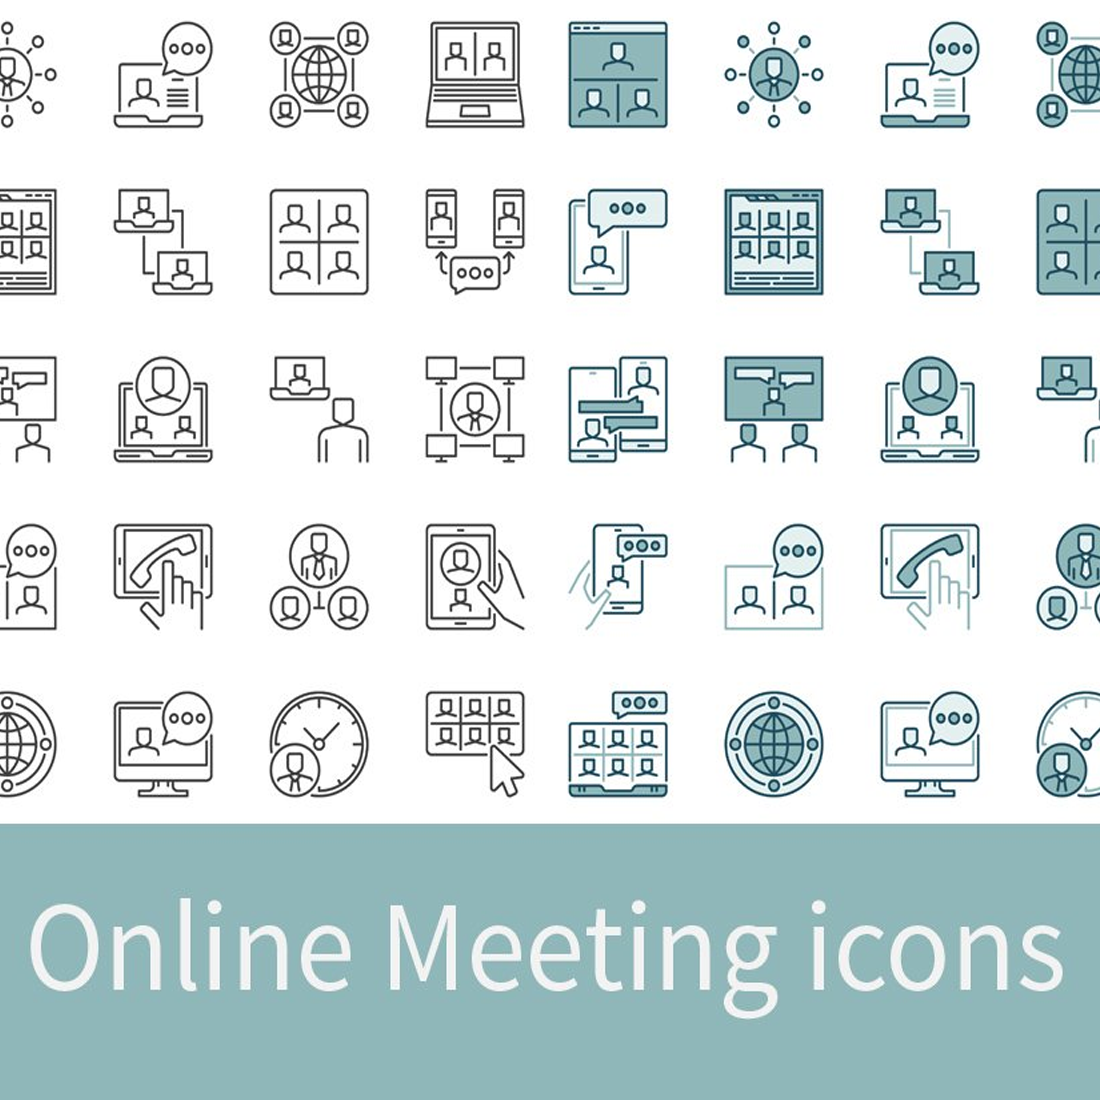 Images preview nline meeting icons set.